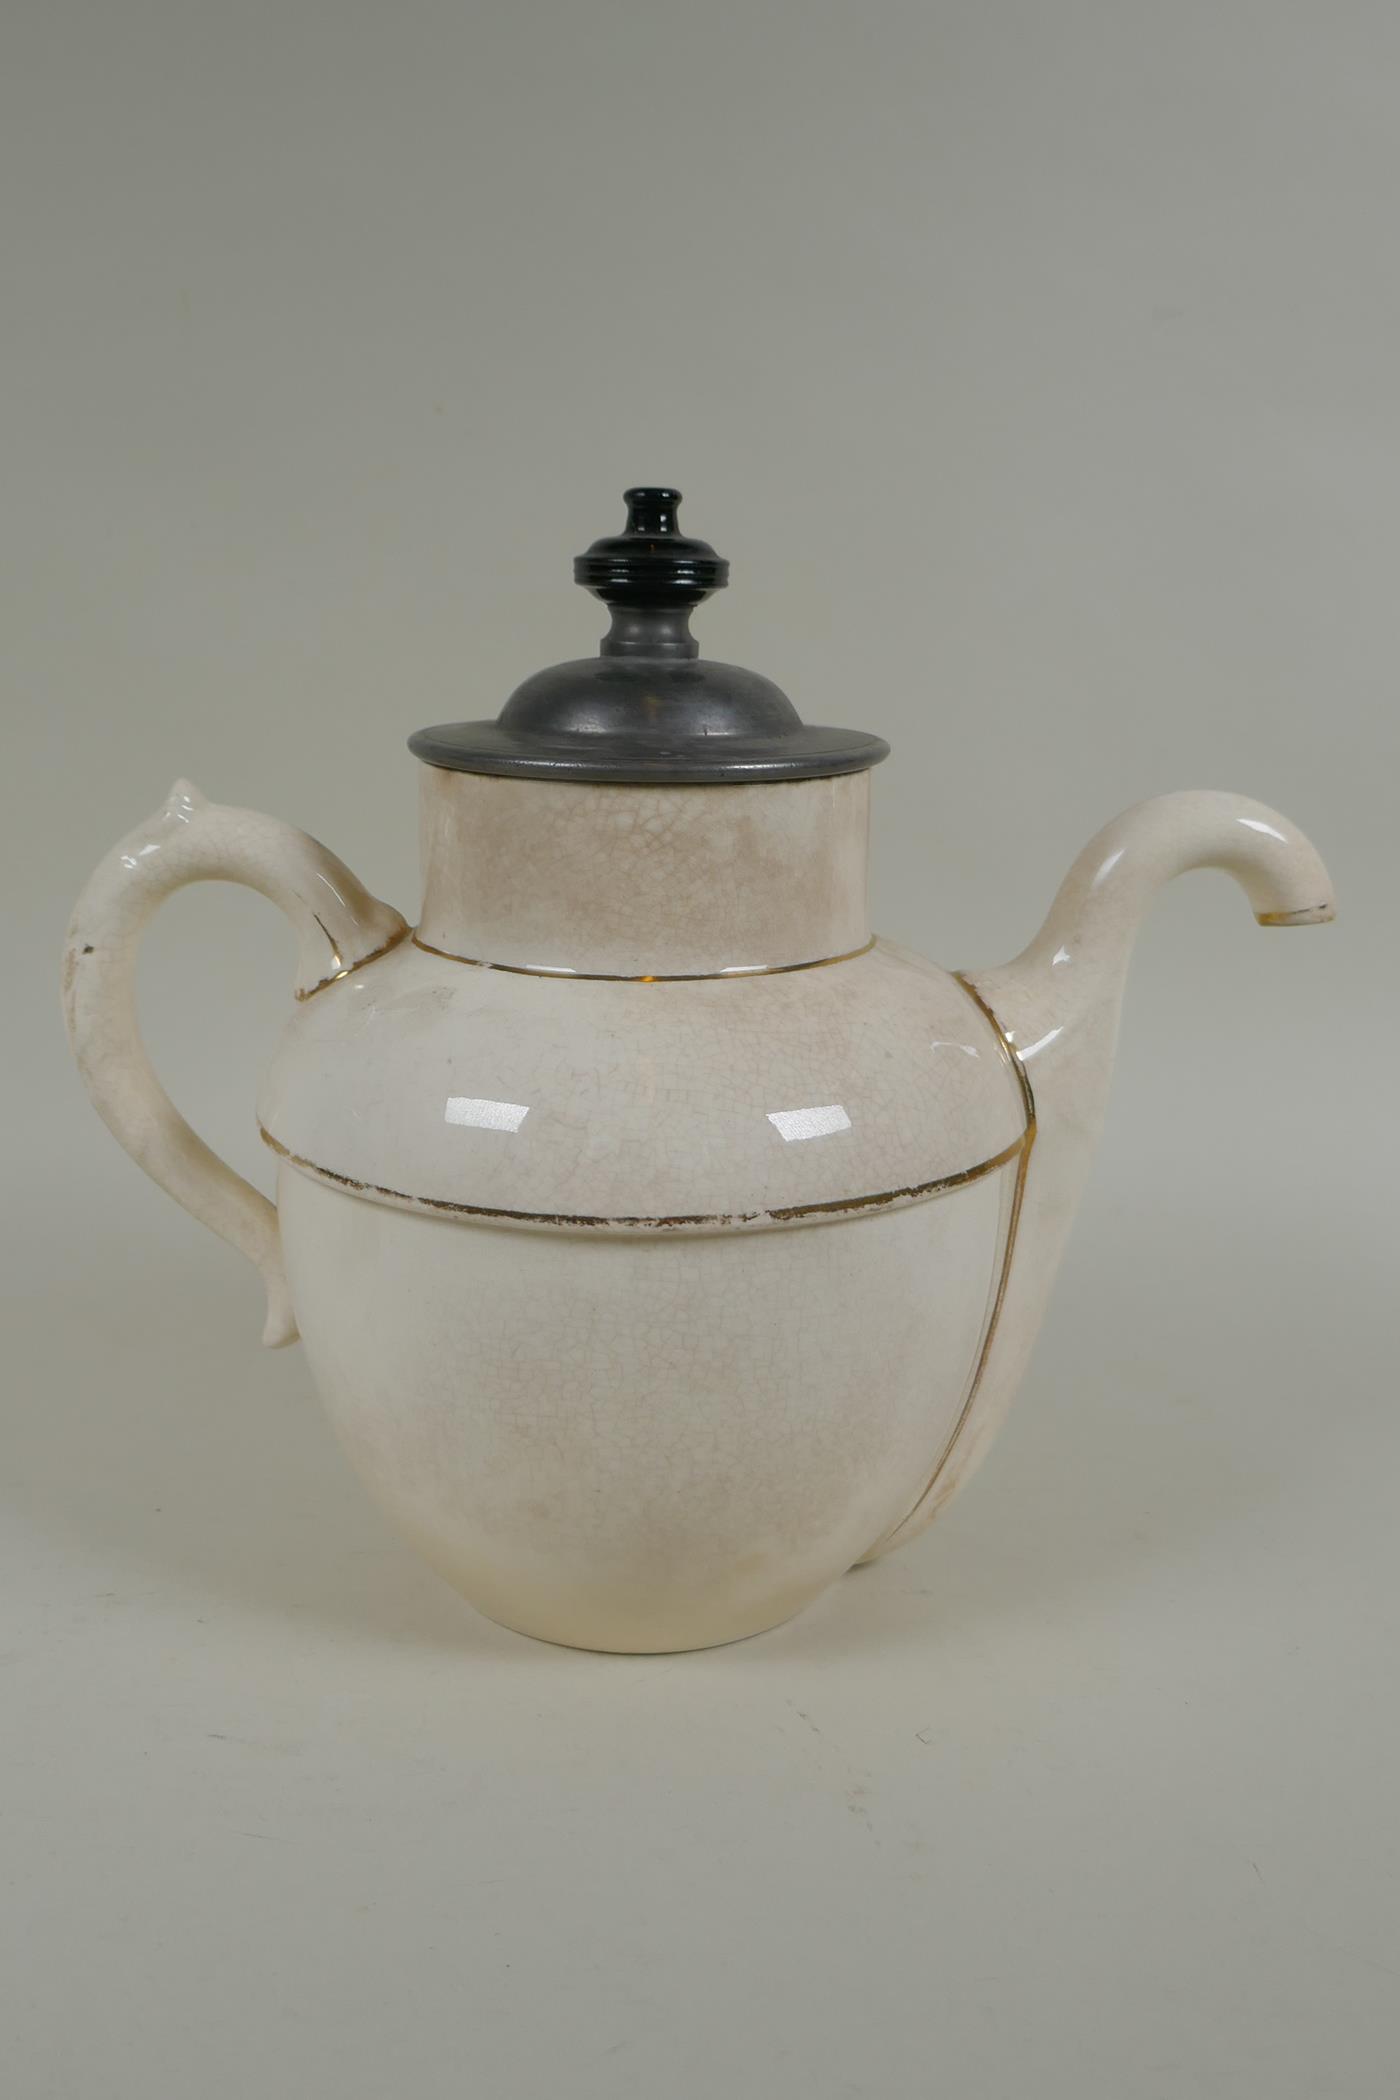 A C19th Burslem Royal patent self pouring teapot, an early stoneware mug with transfer decoration of - Image 3 of 9